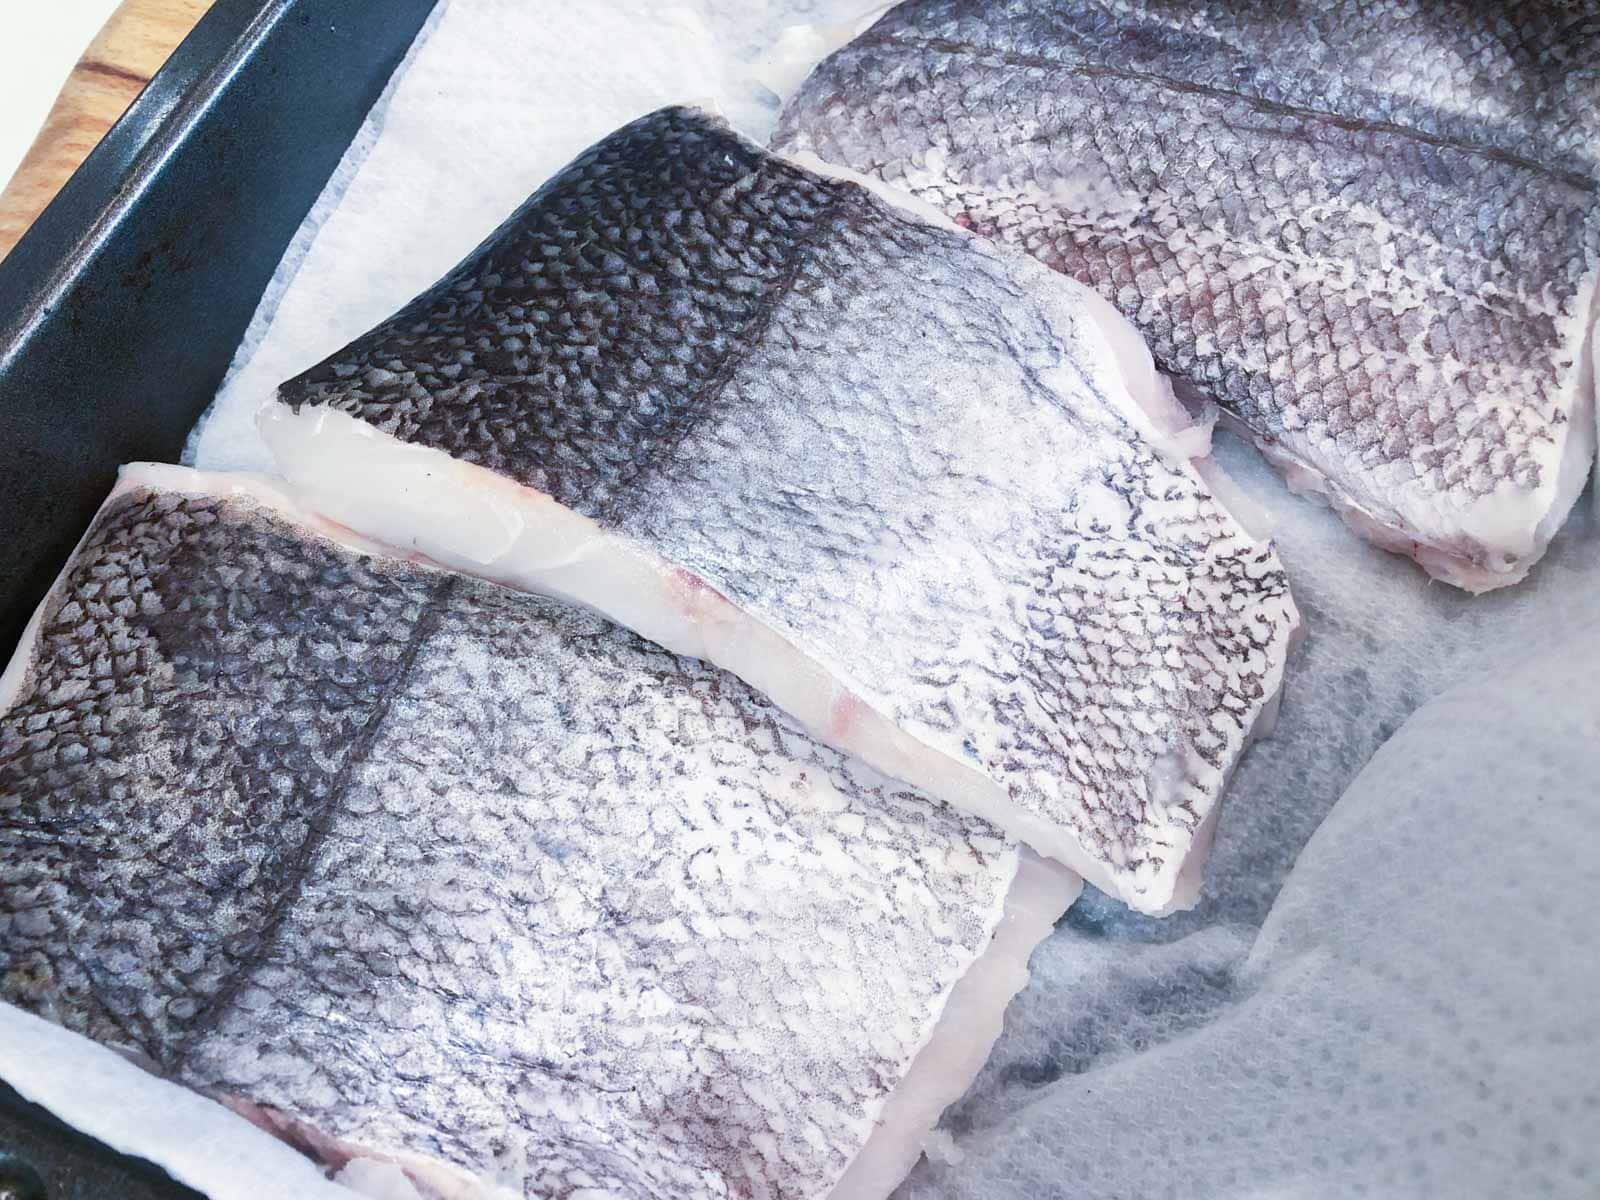 3 fillets of hake fish skin side up on a tray.